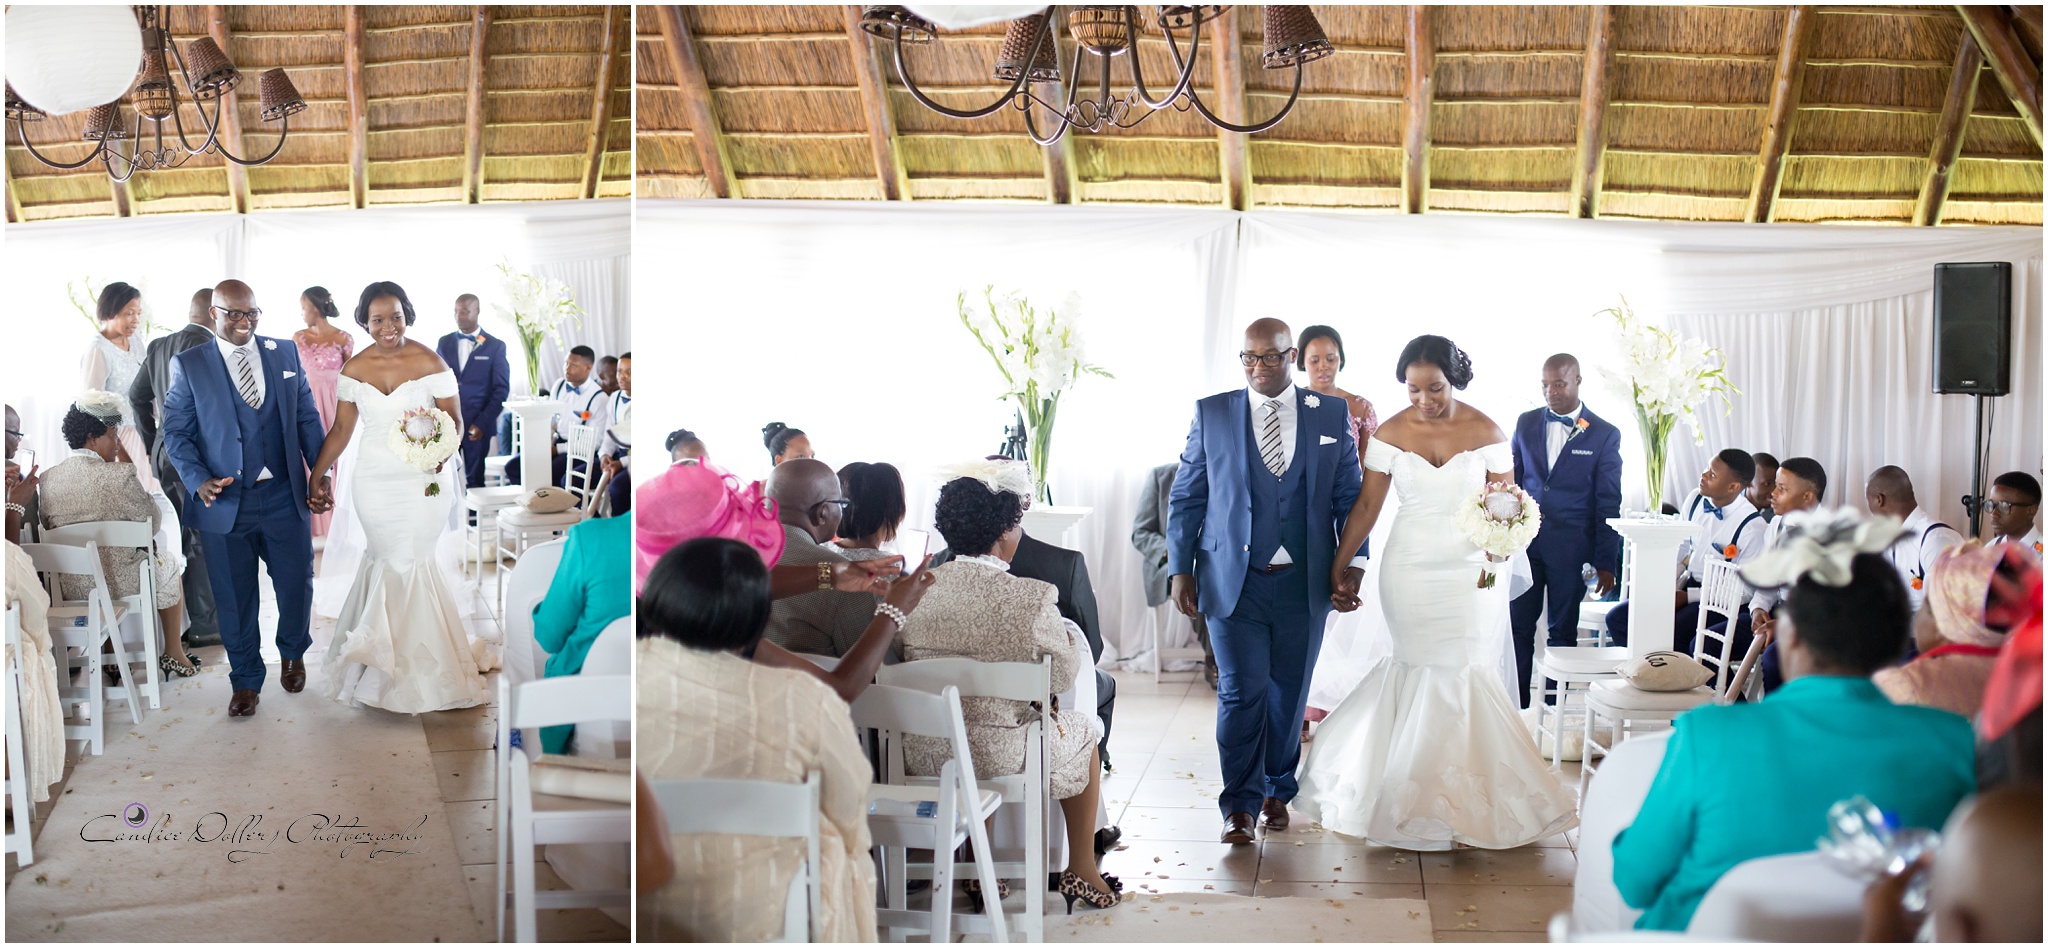 Thembi & Sabelo's Wedding - Candice Dollery Photography_8293